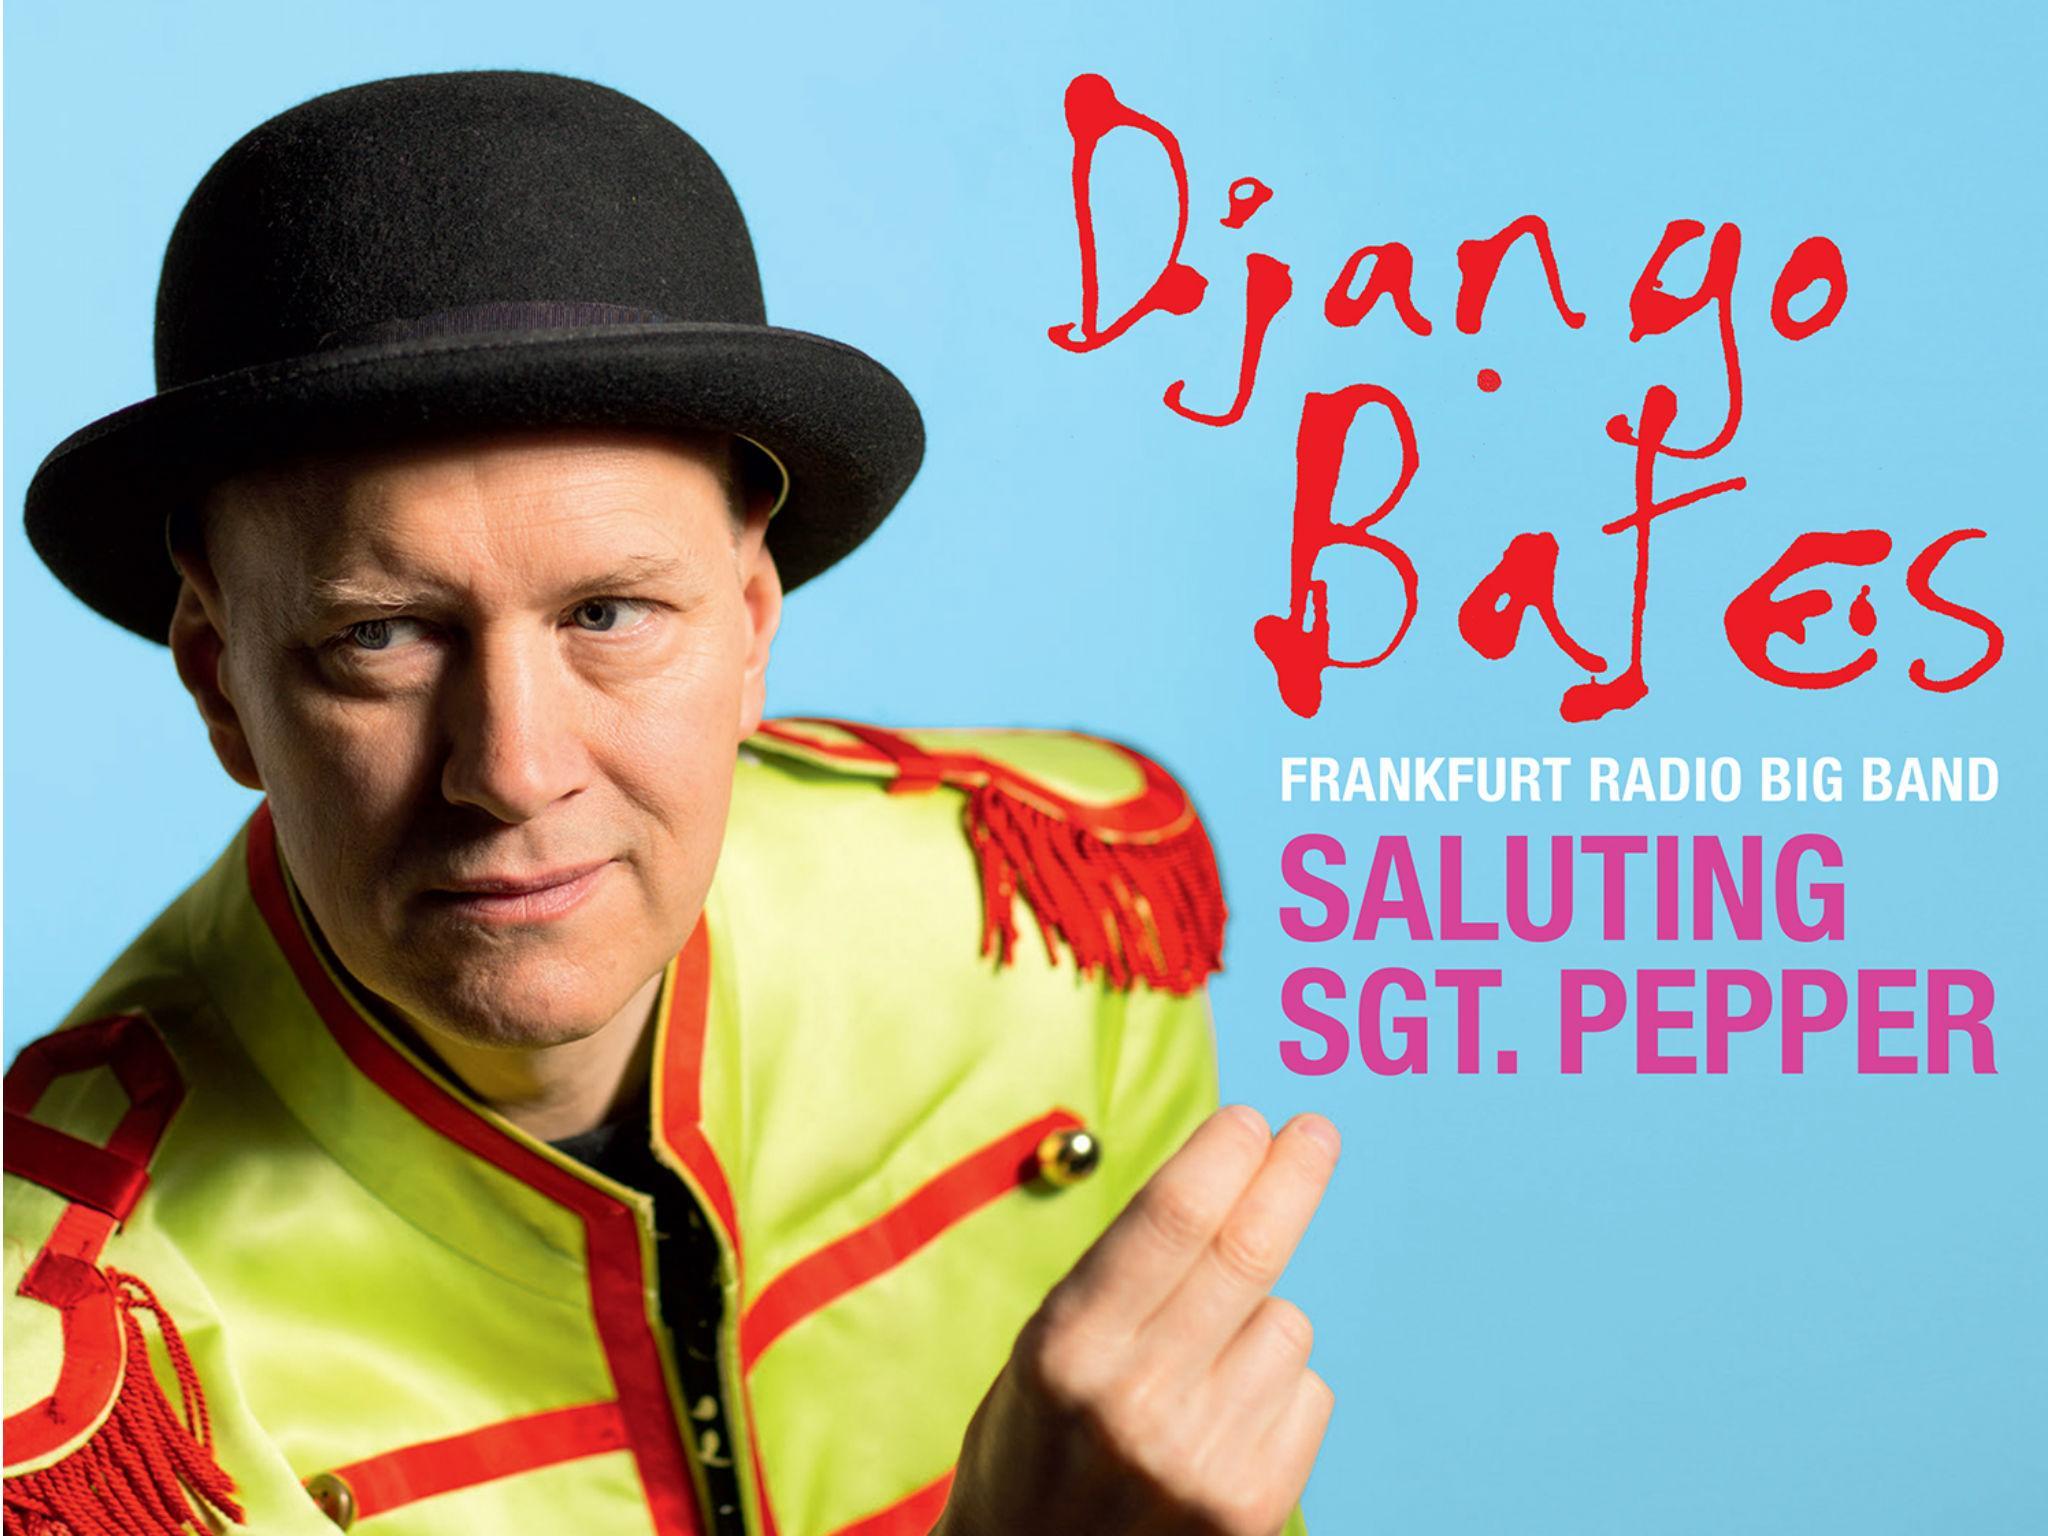 Django Bates with the Frankfurt Radio Big Band have released a jazz version of 'Sgt Pepper's Lonely Hearts Club Band'